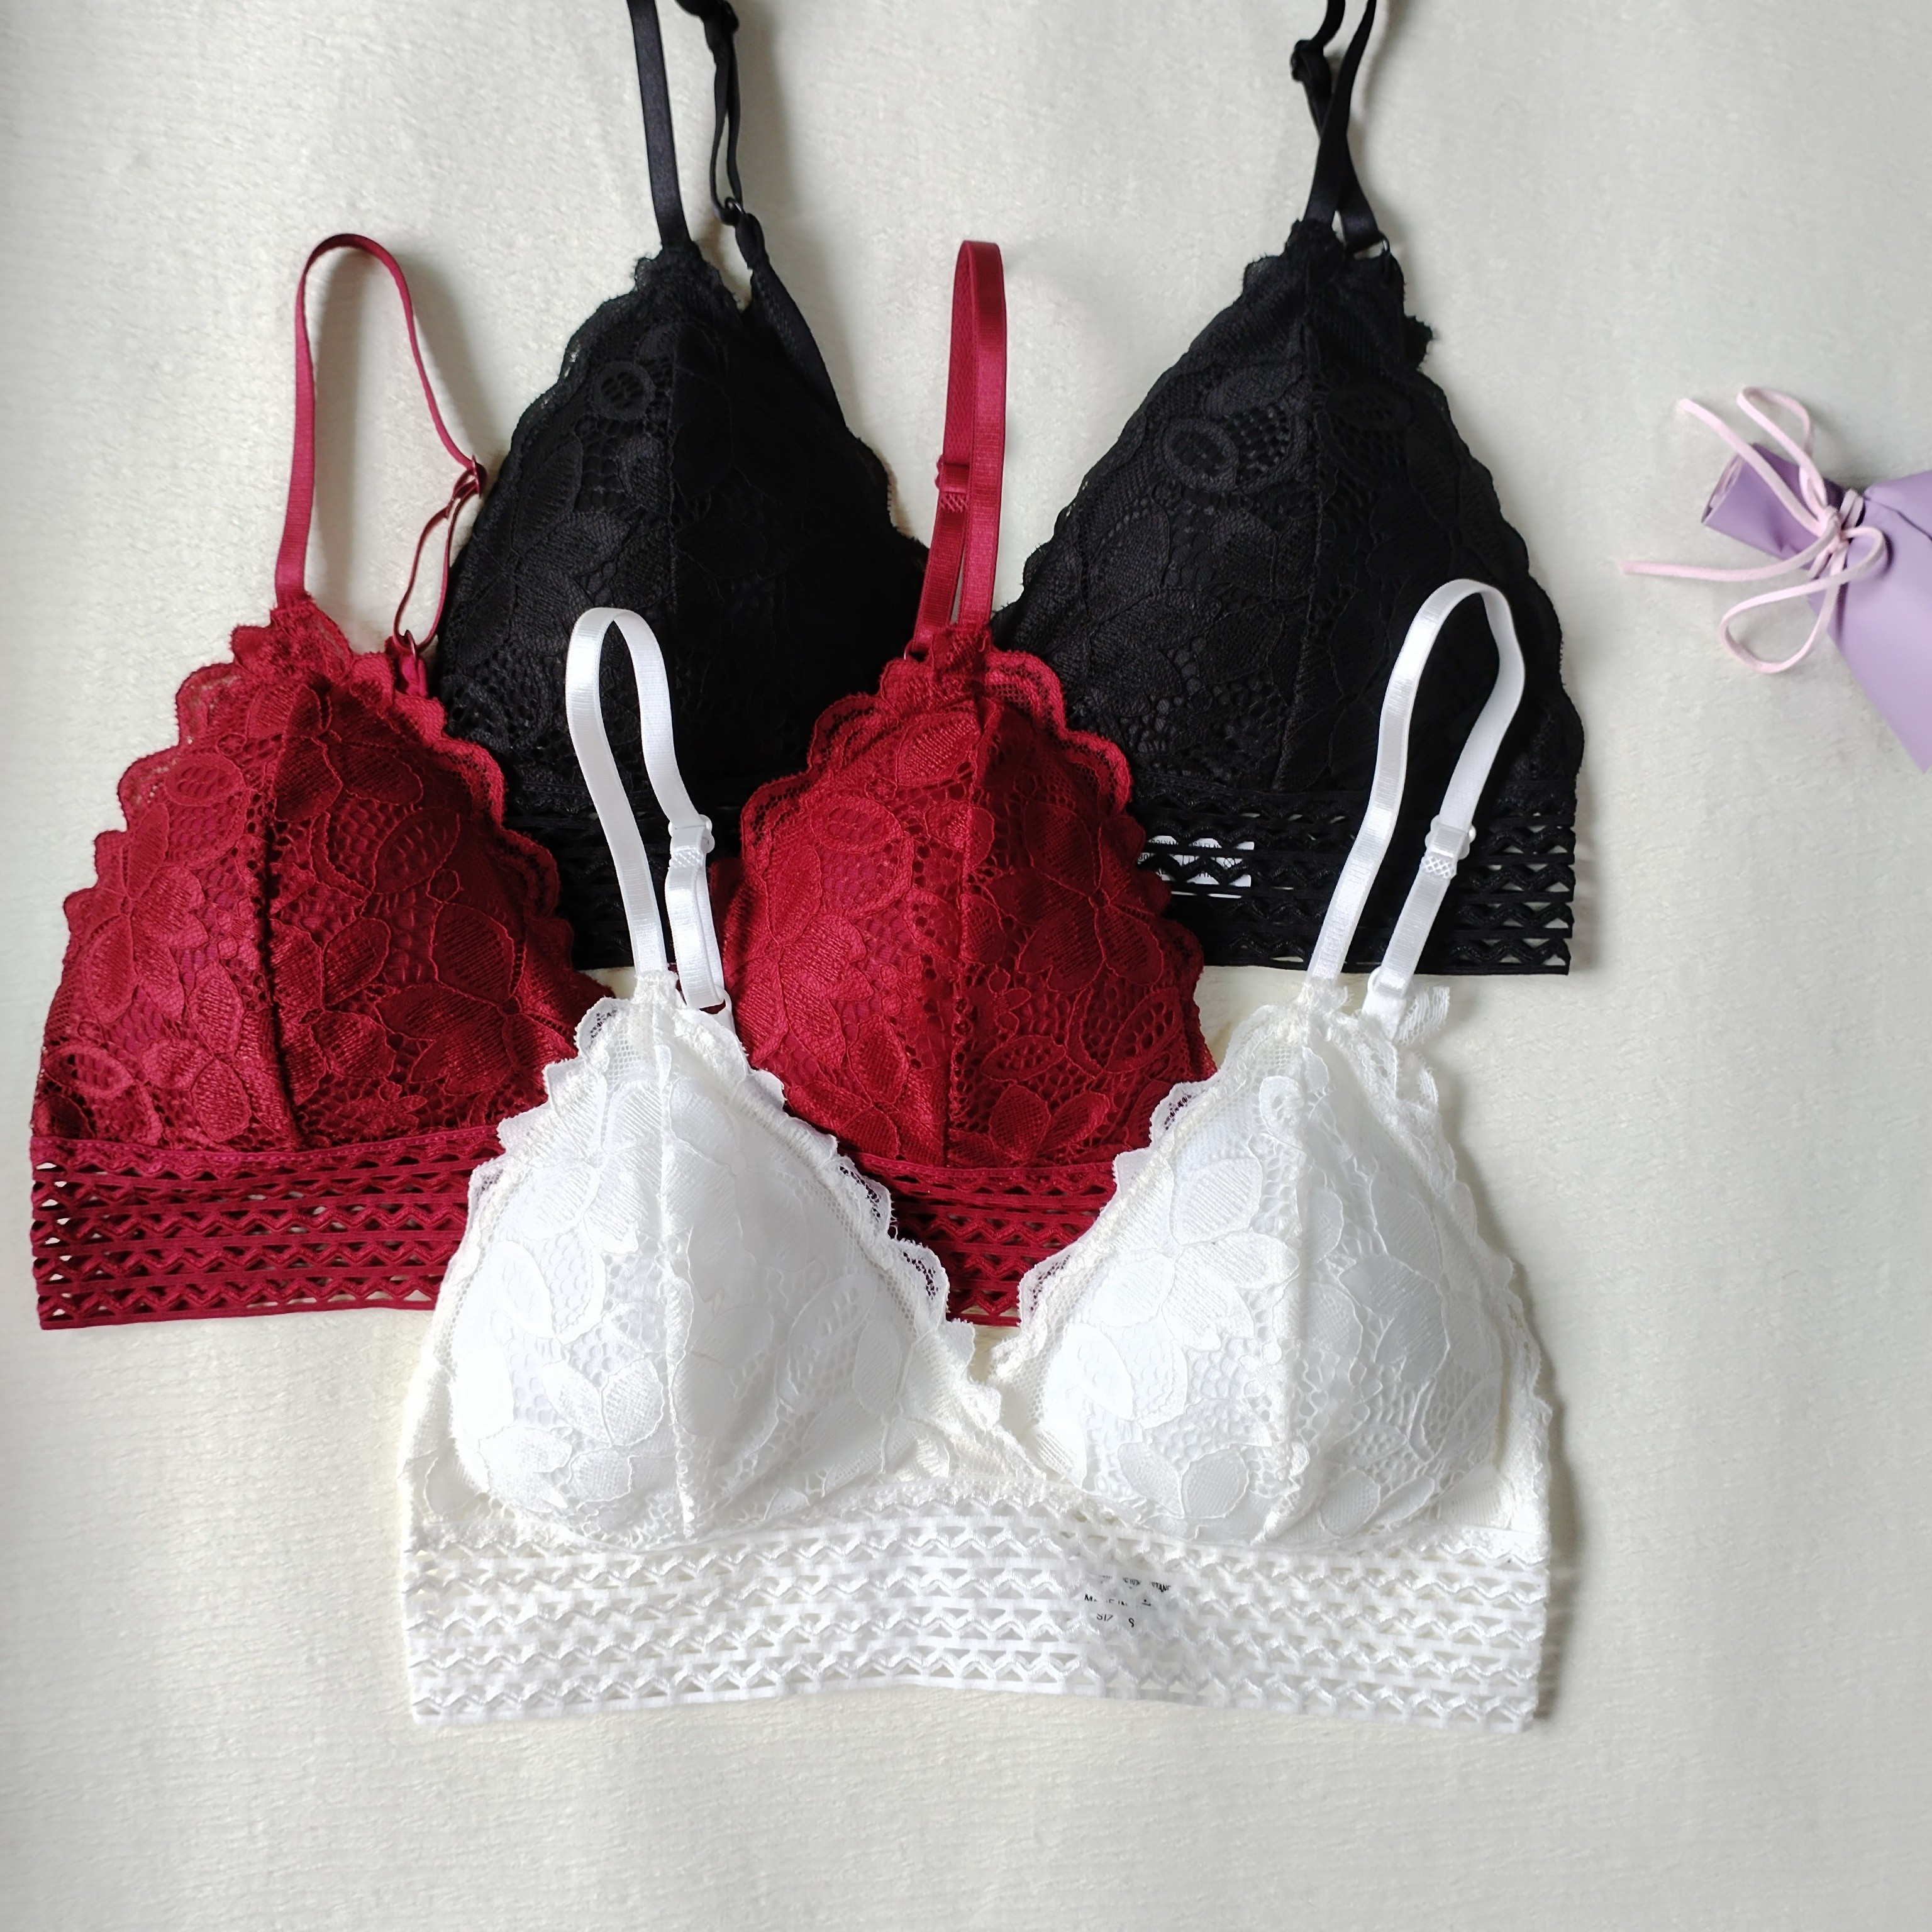 

Valentine's Day 3pcs Lace Wireless Bras, Comfy & Breathable Everyday Intimates Bra, Women's Lingerie & Underwear